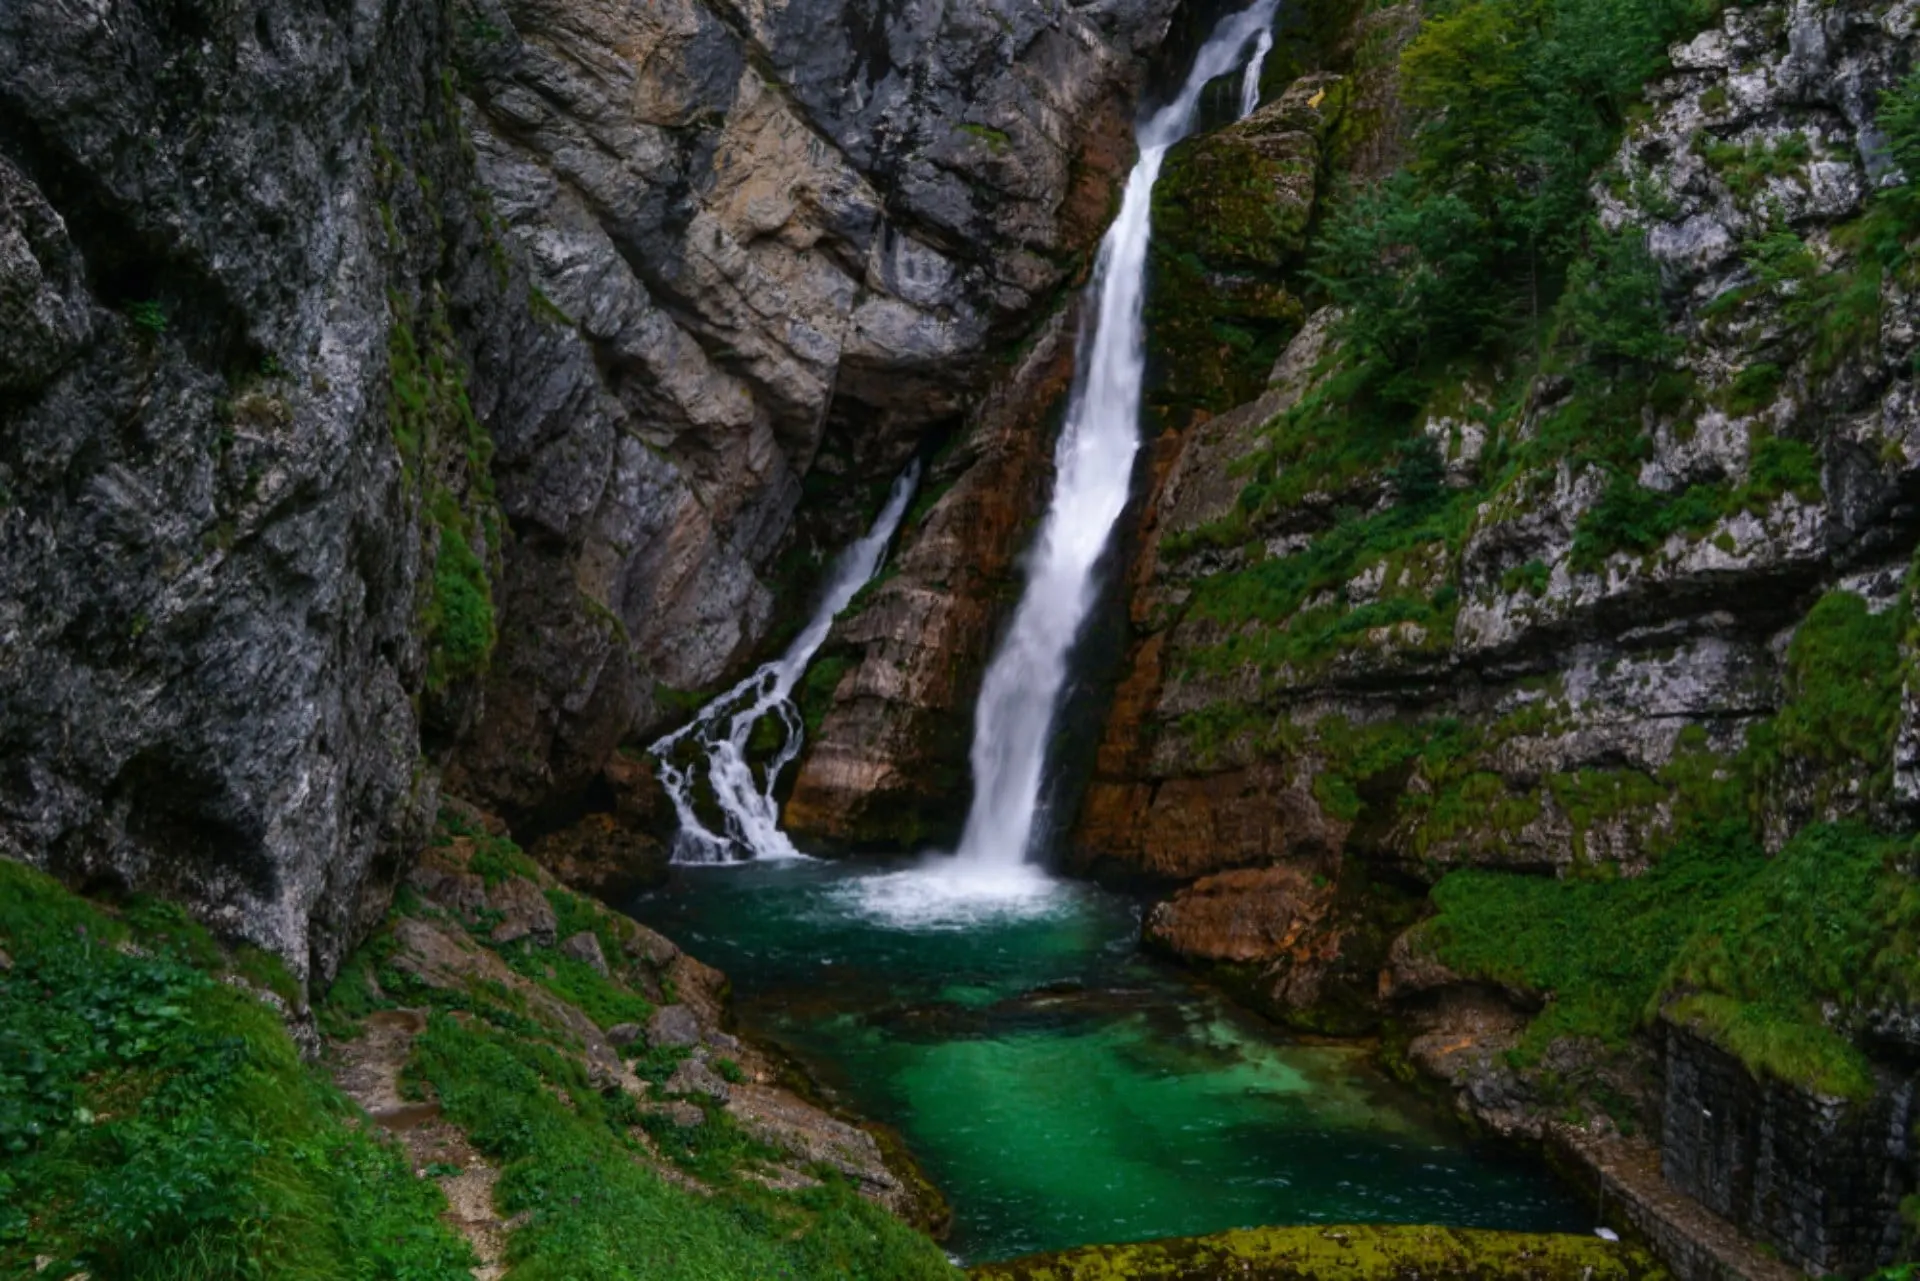 Savica waterval